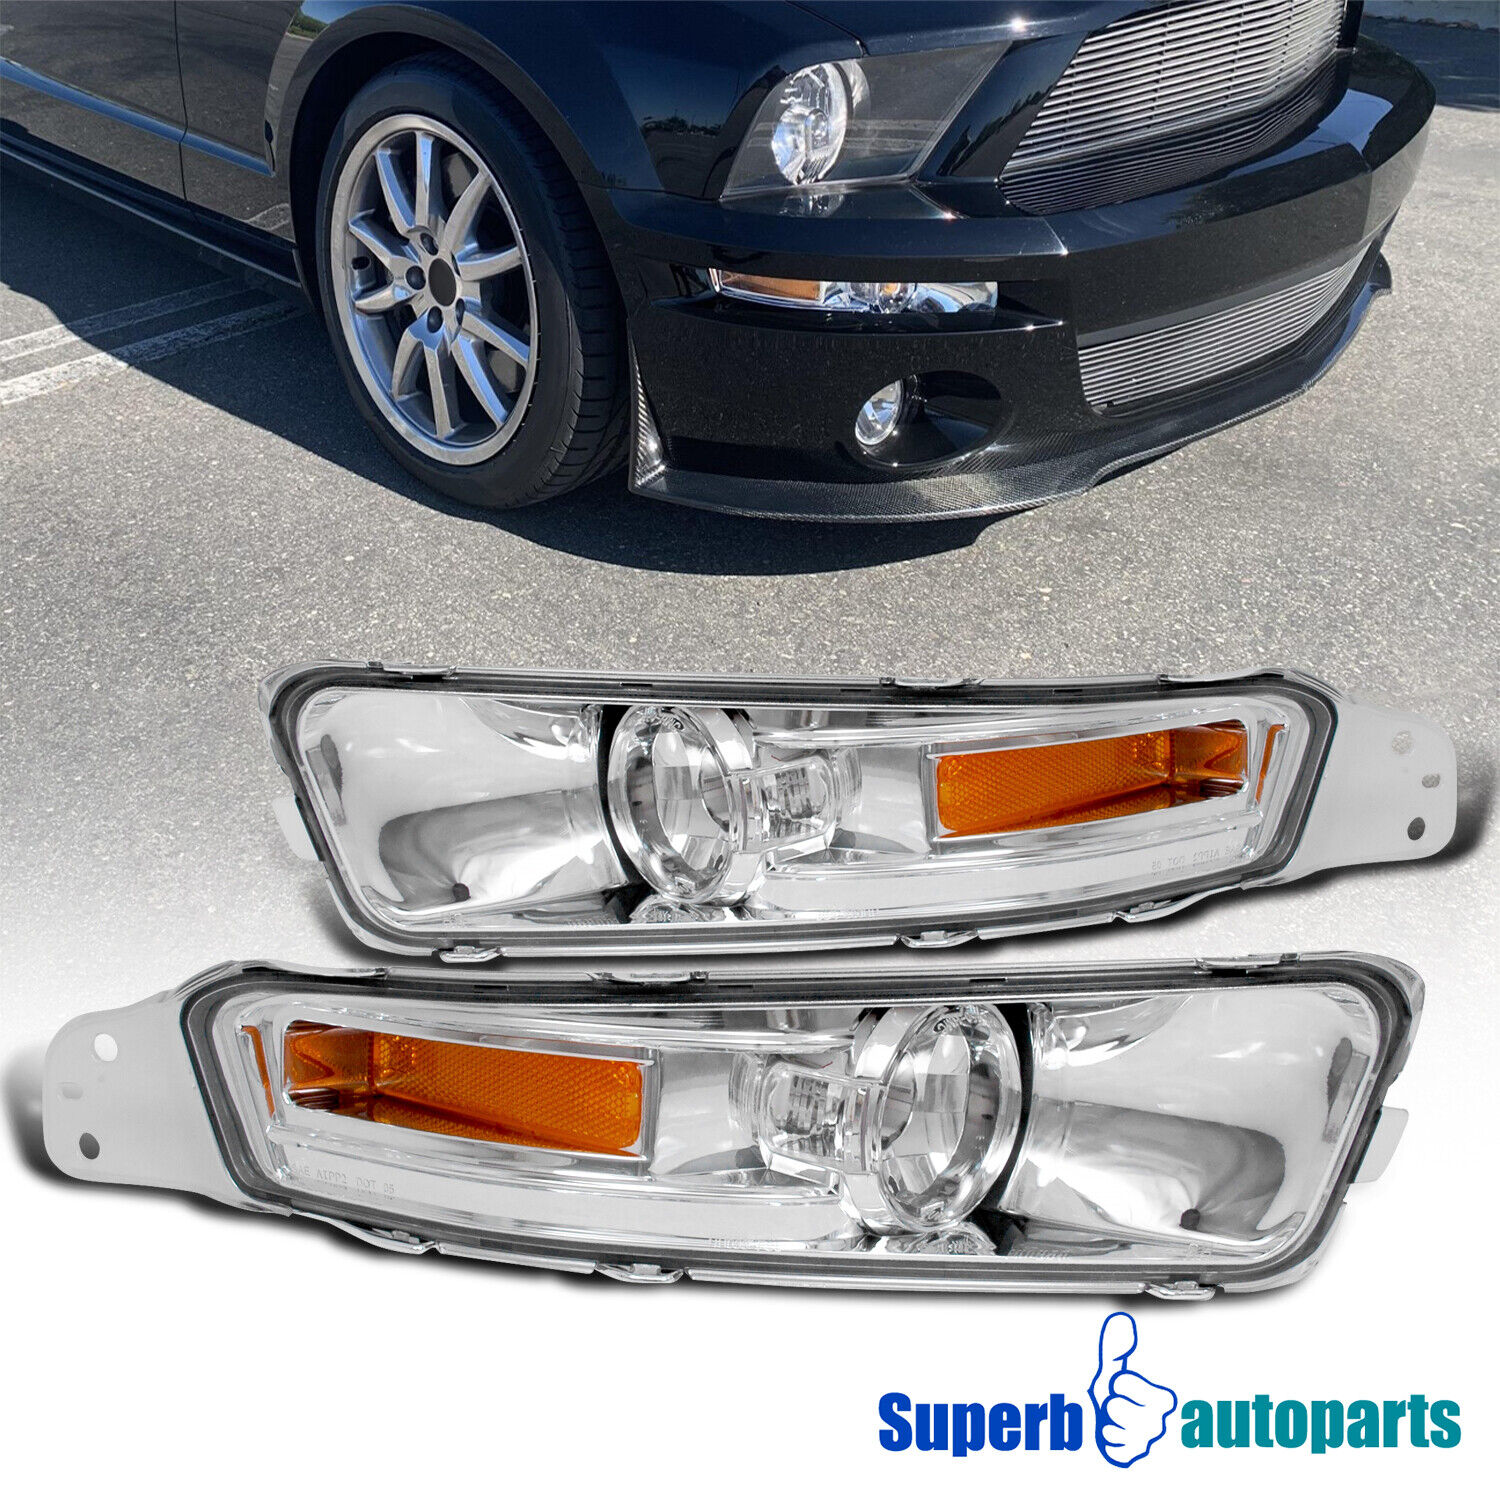 Fits 2005-2009 Ford Mustang V6 GT Signal Bumper Lights Parking Lamps 05-09 Pair